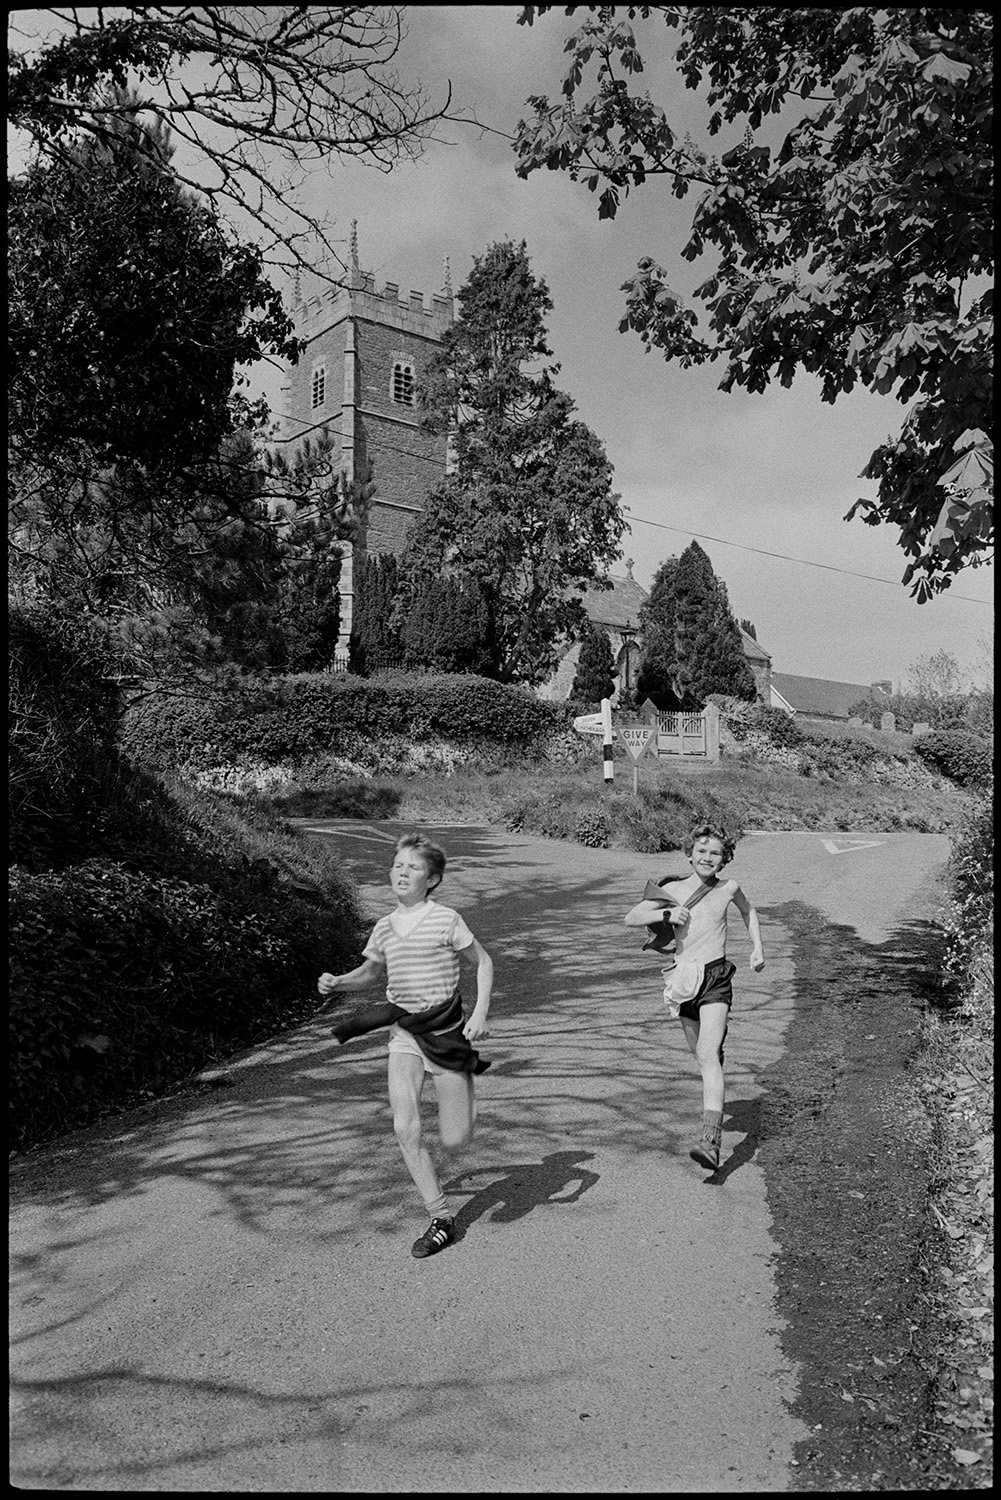 Club Day. Sports, running races, wellie throwing, prizes being given out.
[Two boys running down the road in front of Iddesleigh church on Iddesleigh Club Day.]